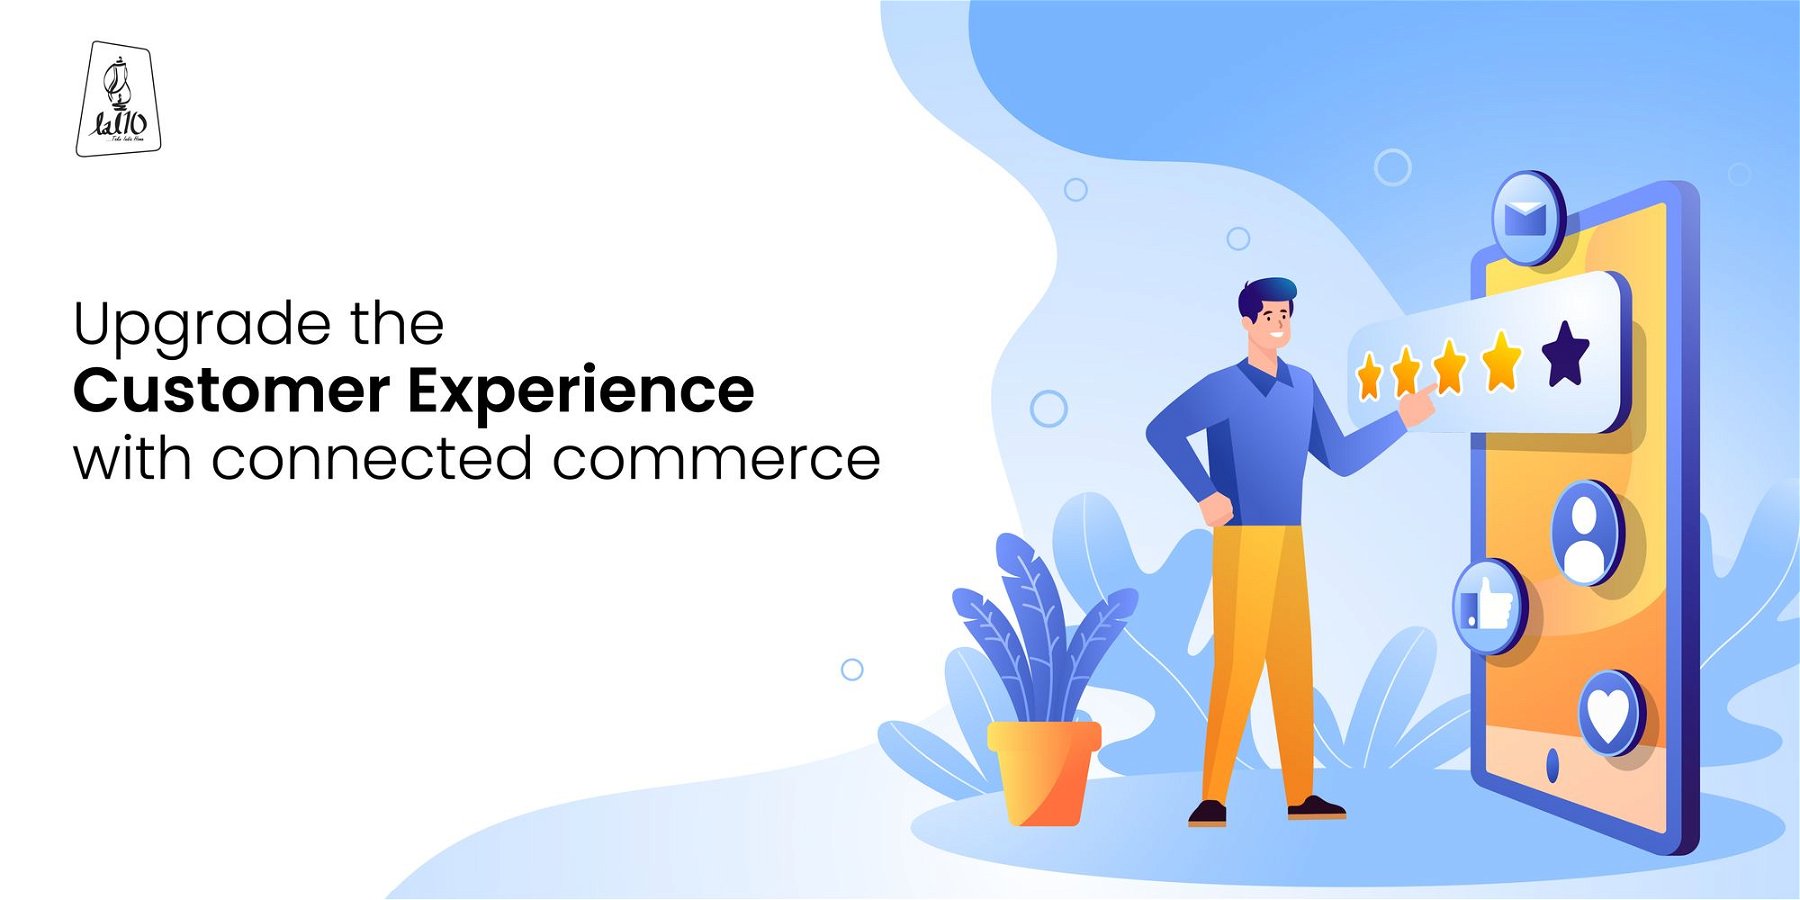 Upgrade the customer experience with connected commerce